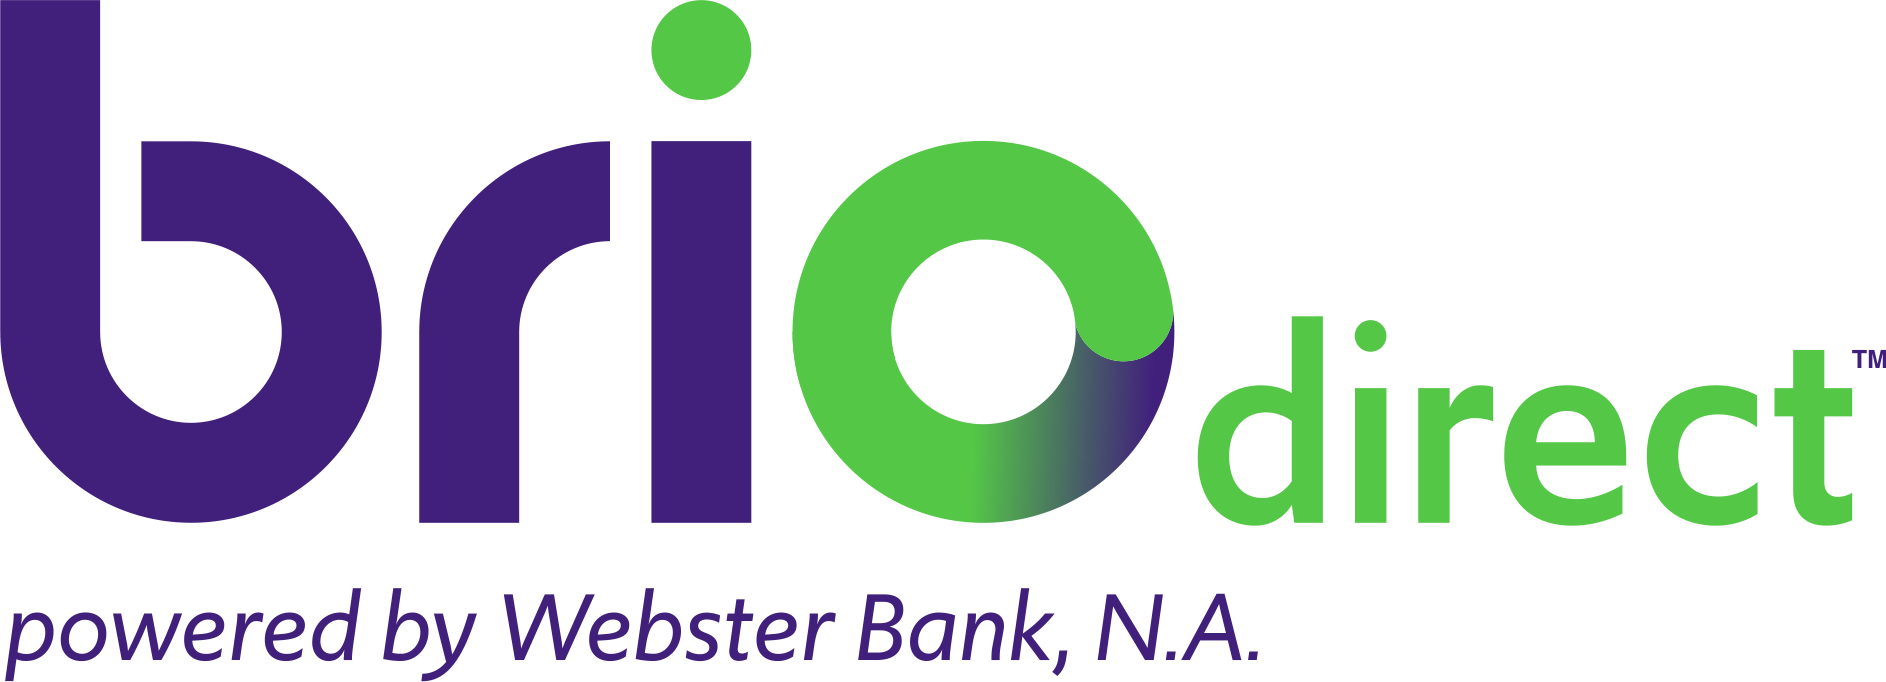 Brio Direct (powered by Webster Bank, N A) home